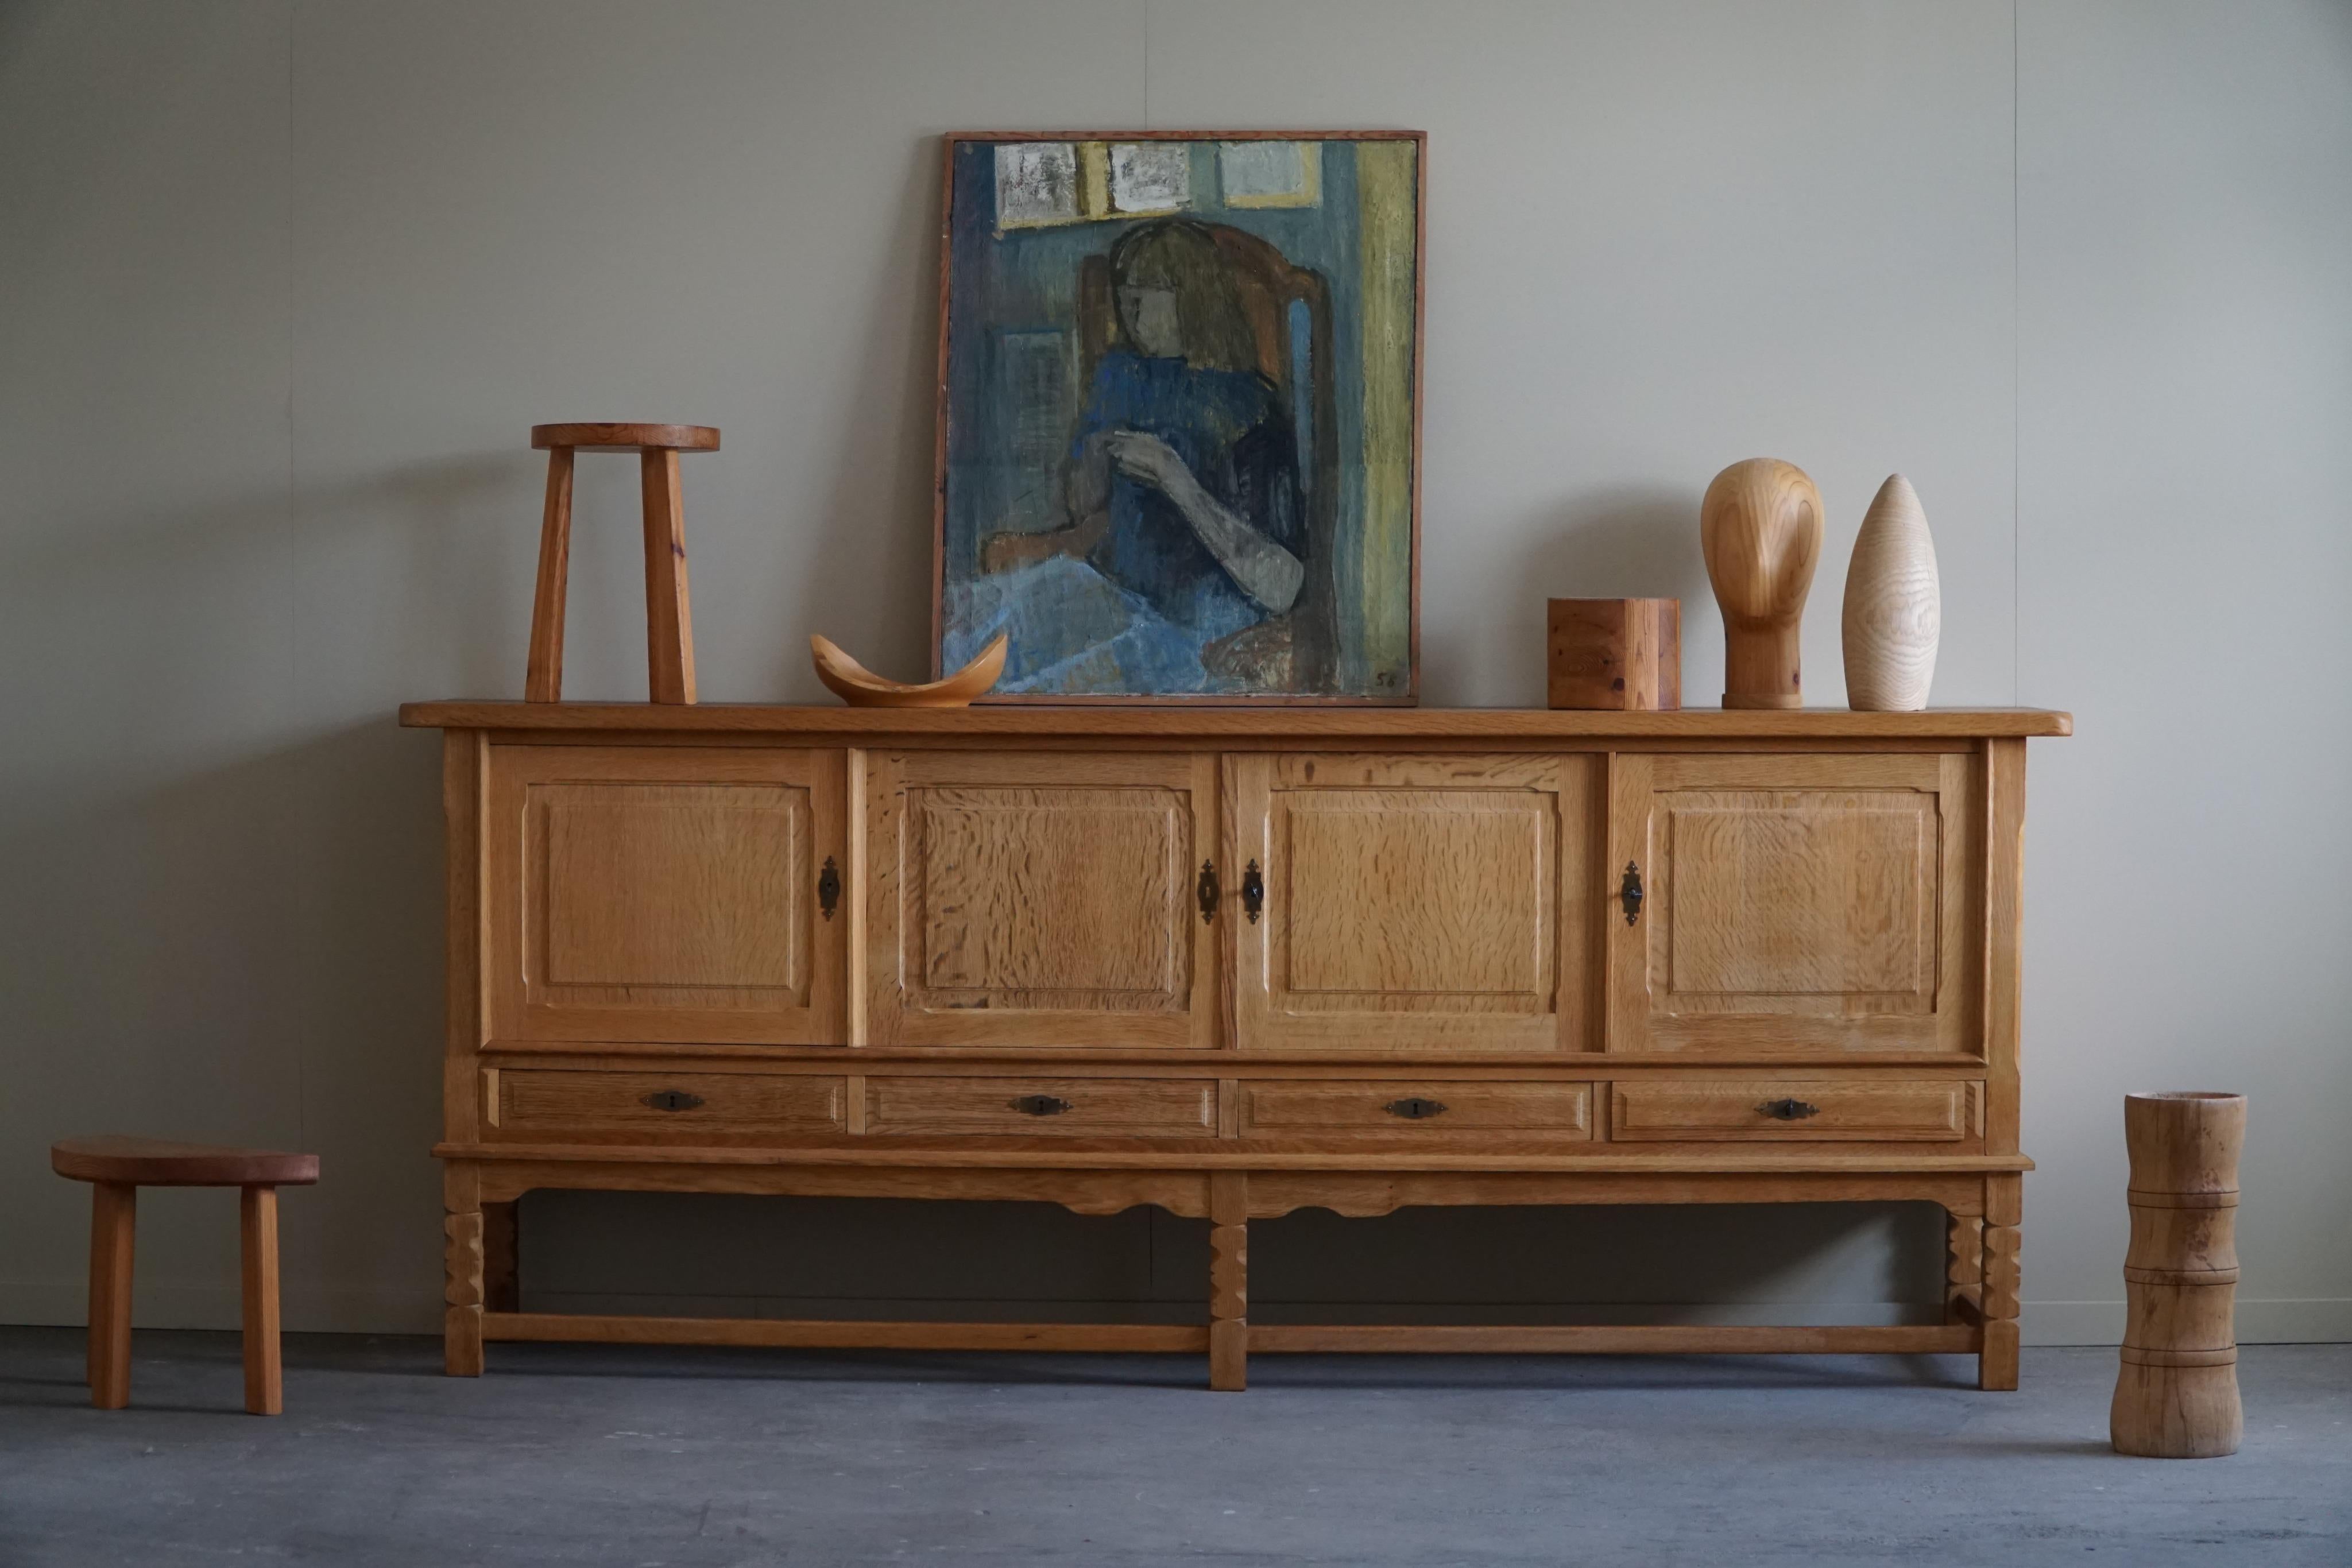 A large rectangular classic sideboard / cabinet in oak with plenty of storage and a refined carved front design. Made by a Danish cabinetmaker in the 1960s. 
This piece is in a good vintage condition.

This amazing brutalist sideboard will